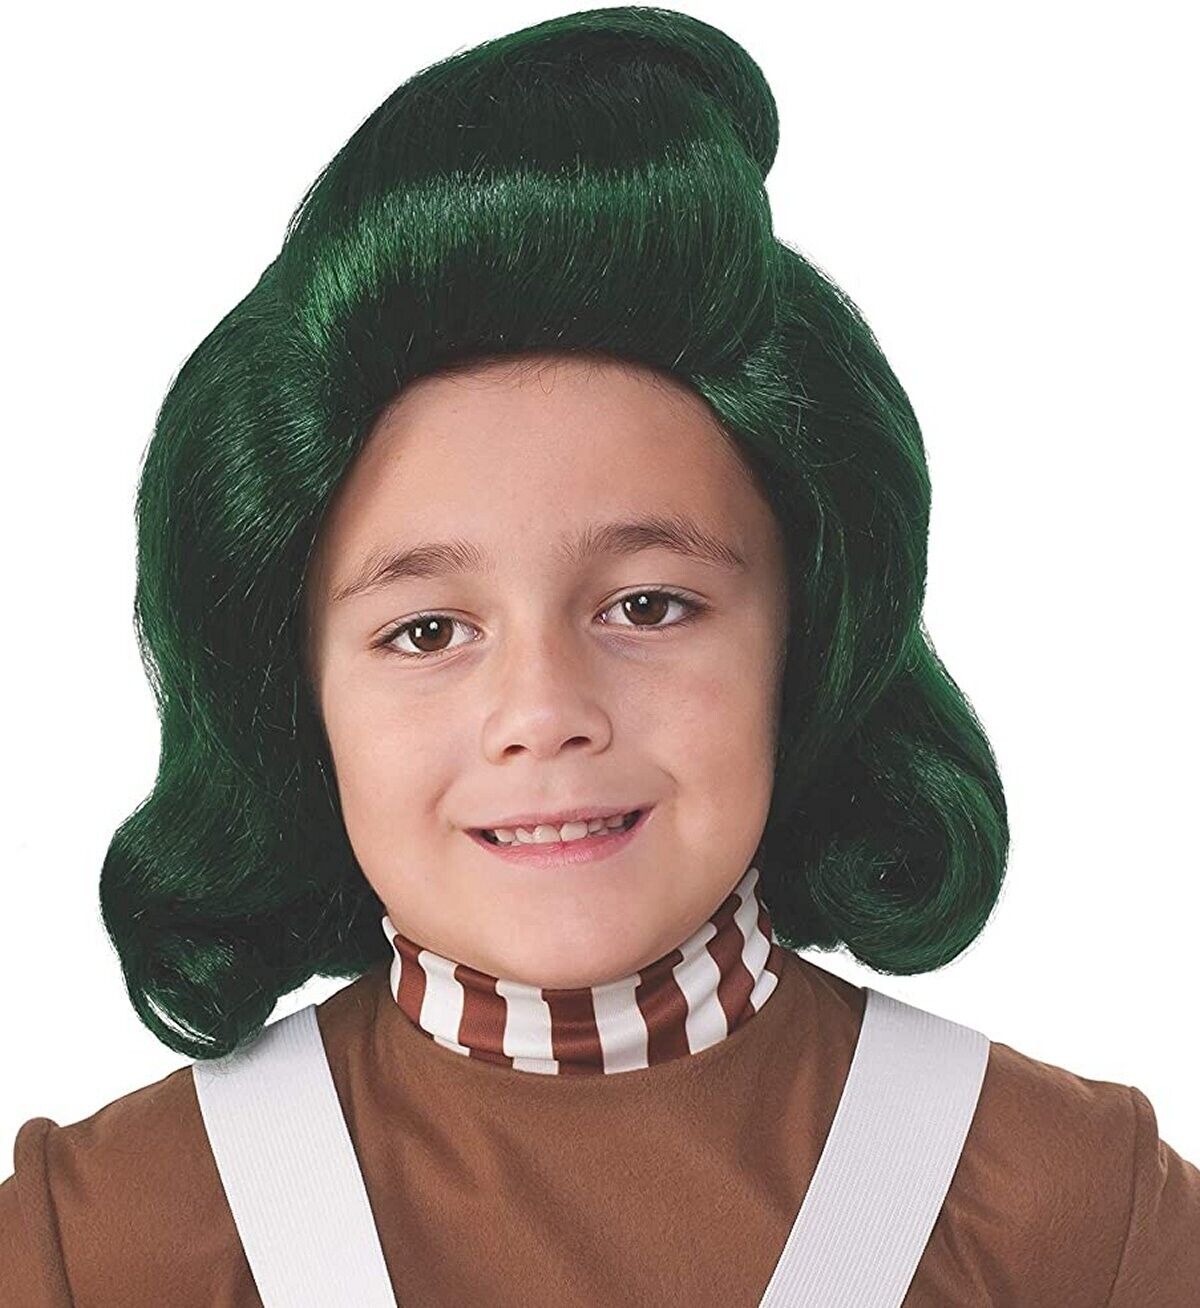 Oompa Loompa Wig Child Kids Costume Green Willy Wonka Charlie Chocolate OFFICIAL